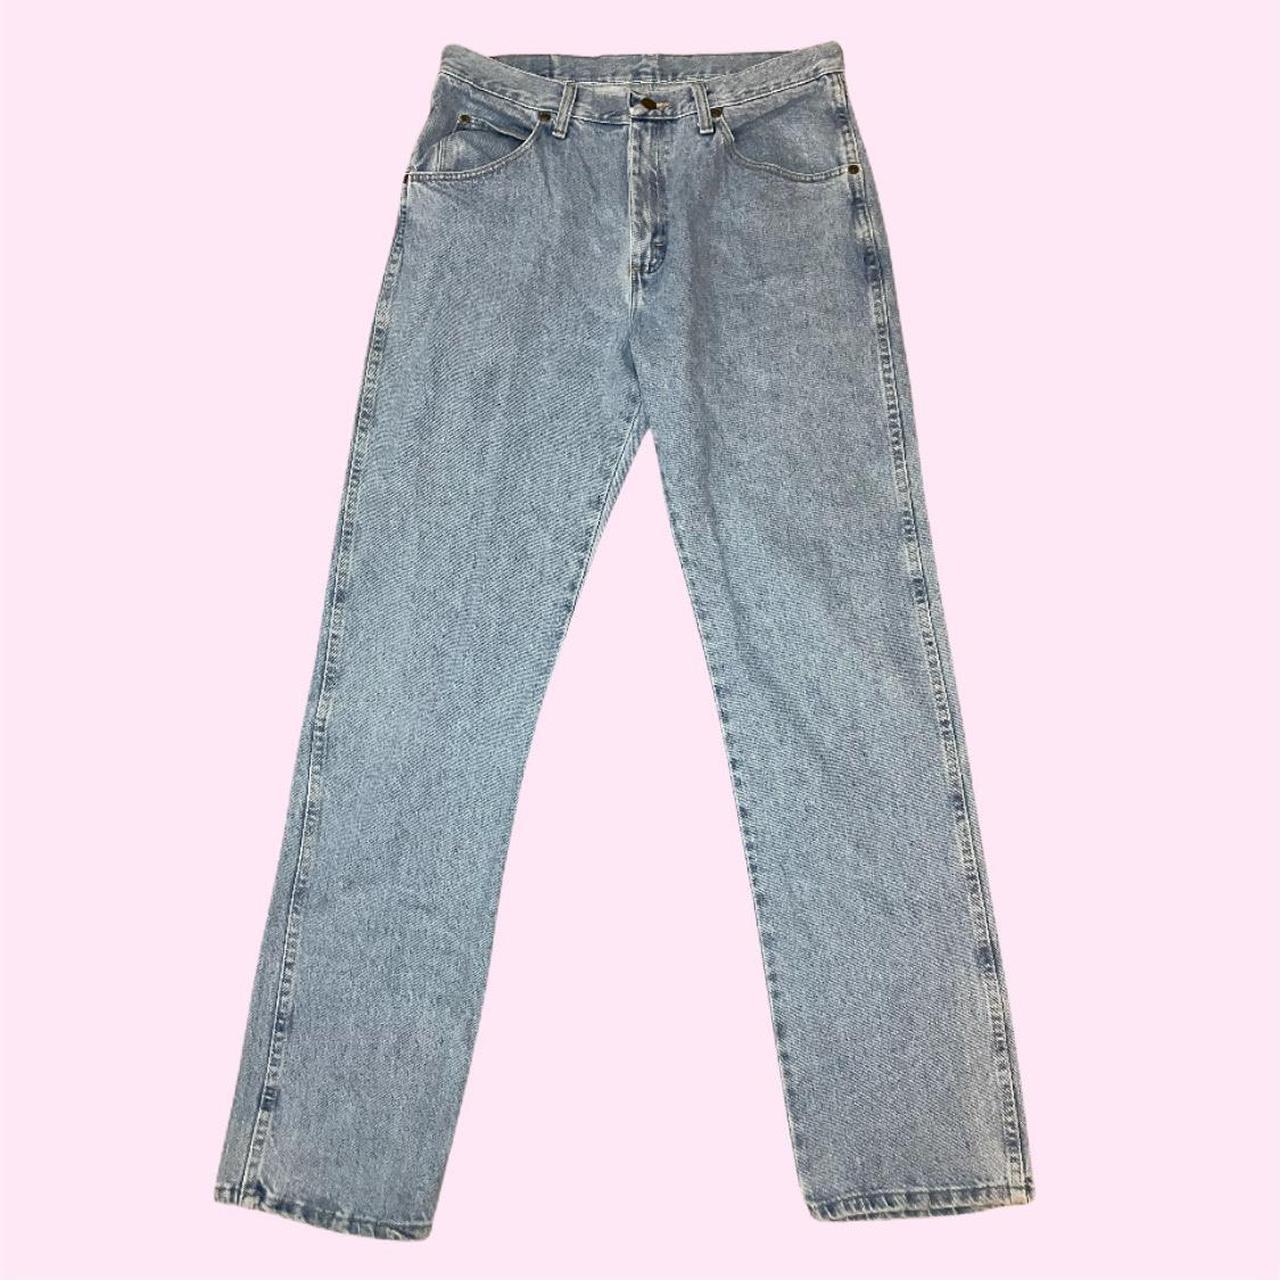 Vintage high waisted wrangler jeans This beautiful... - Depop